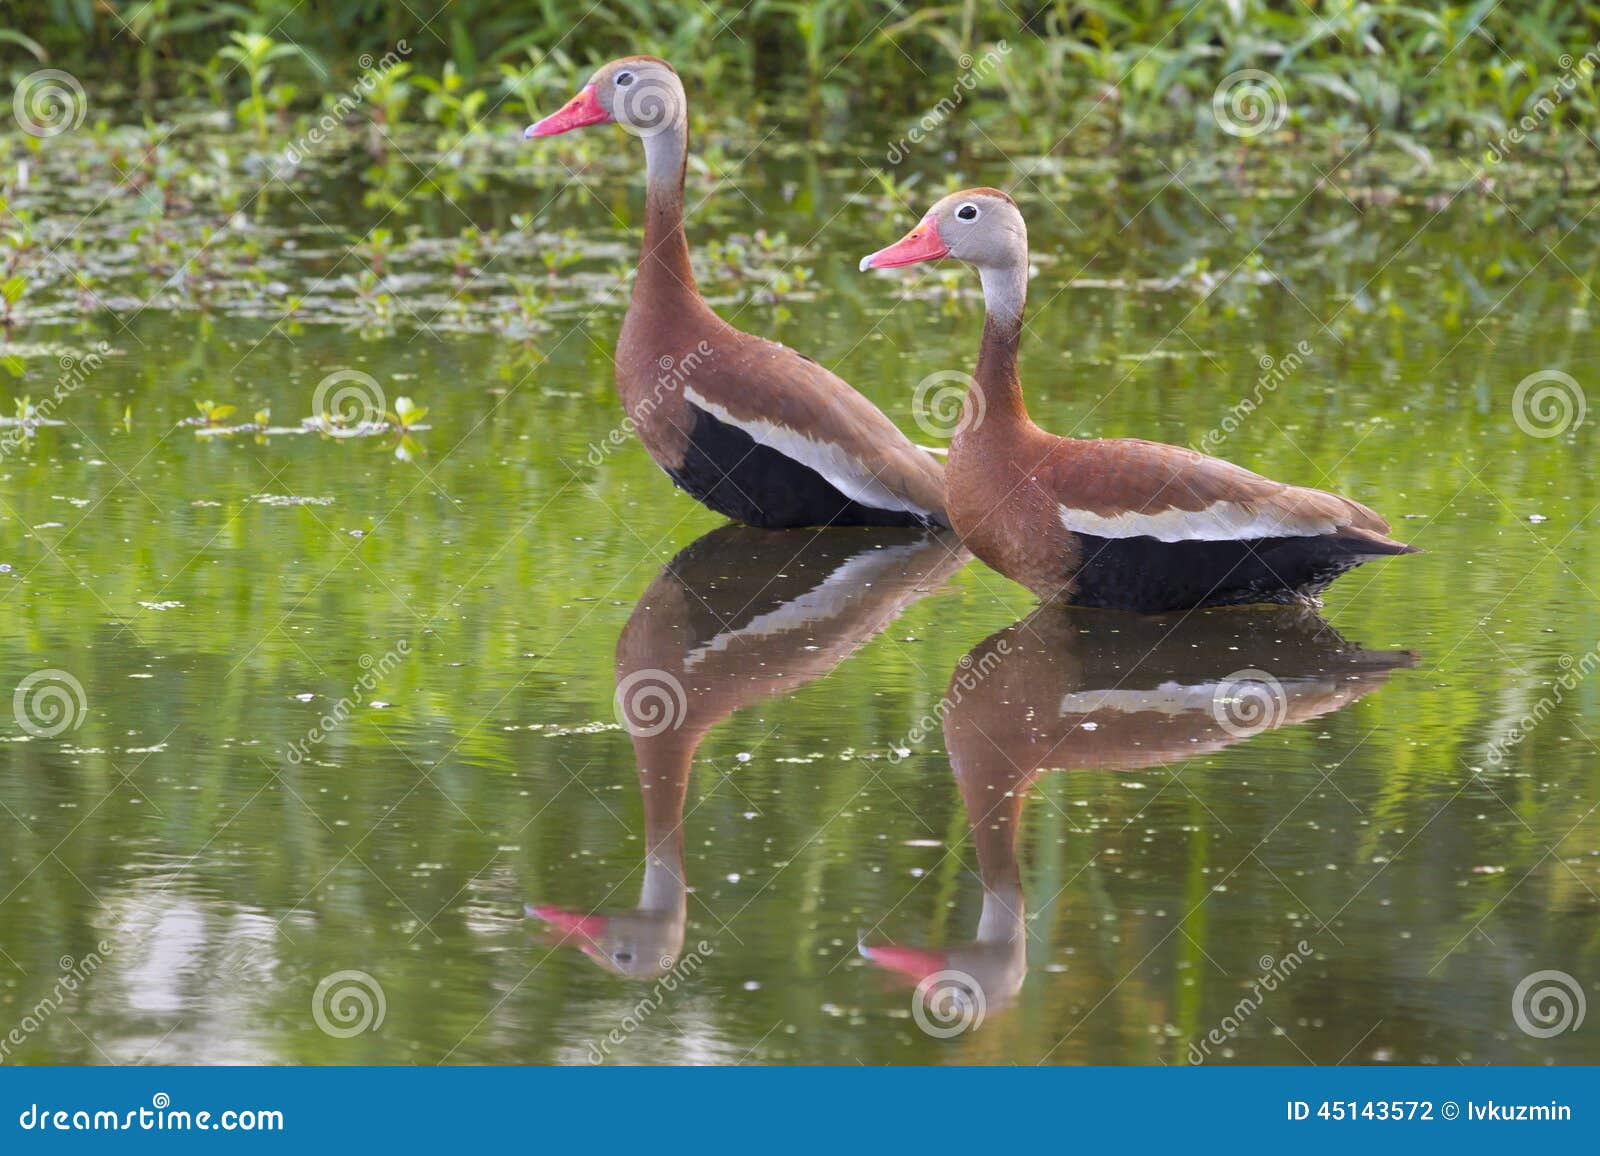 a pair of black-bellied whistling ducks (dendrocygna autumnalis) in a swamp